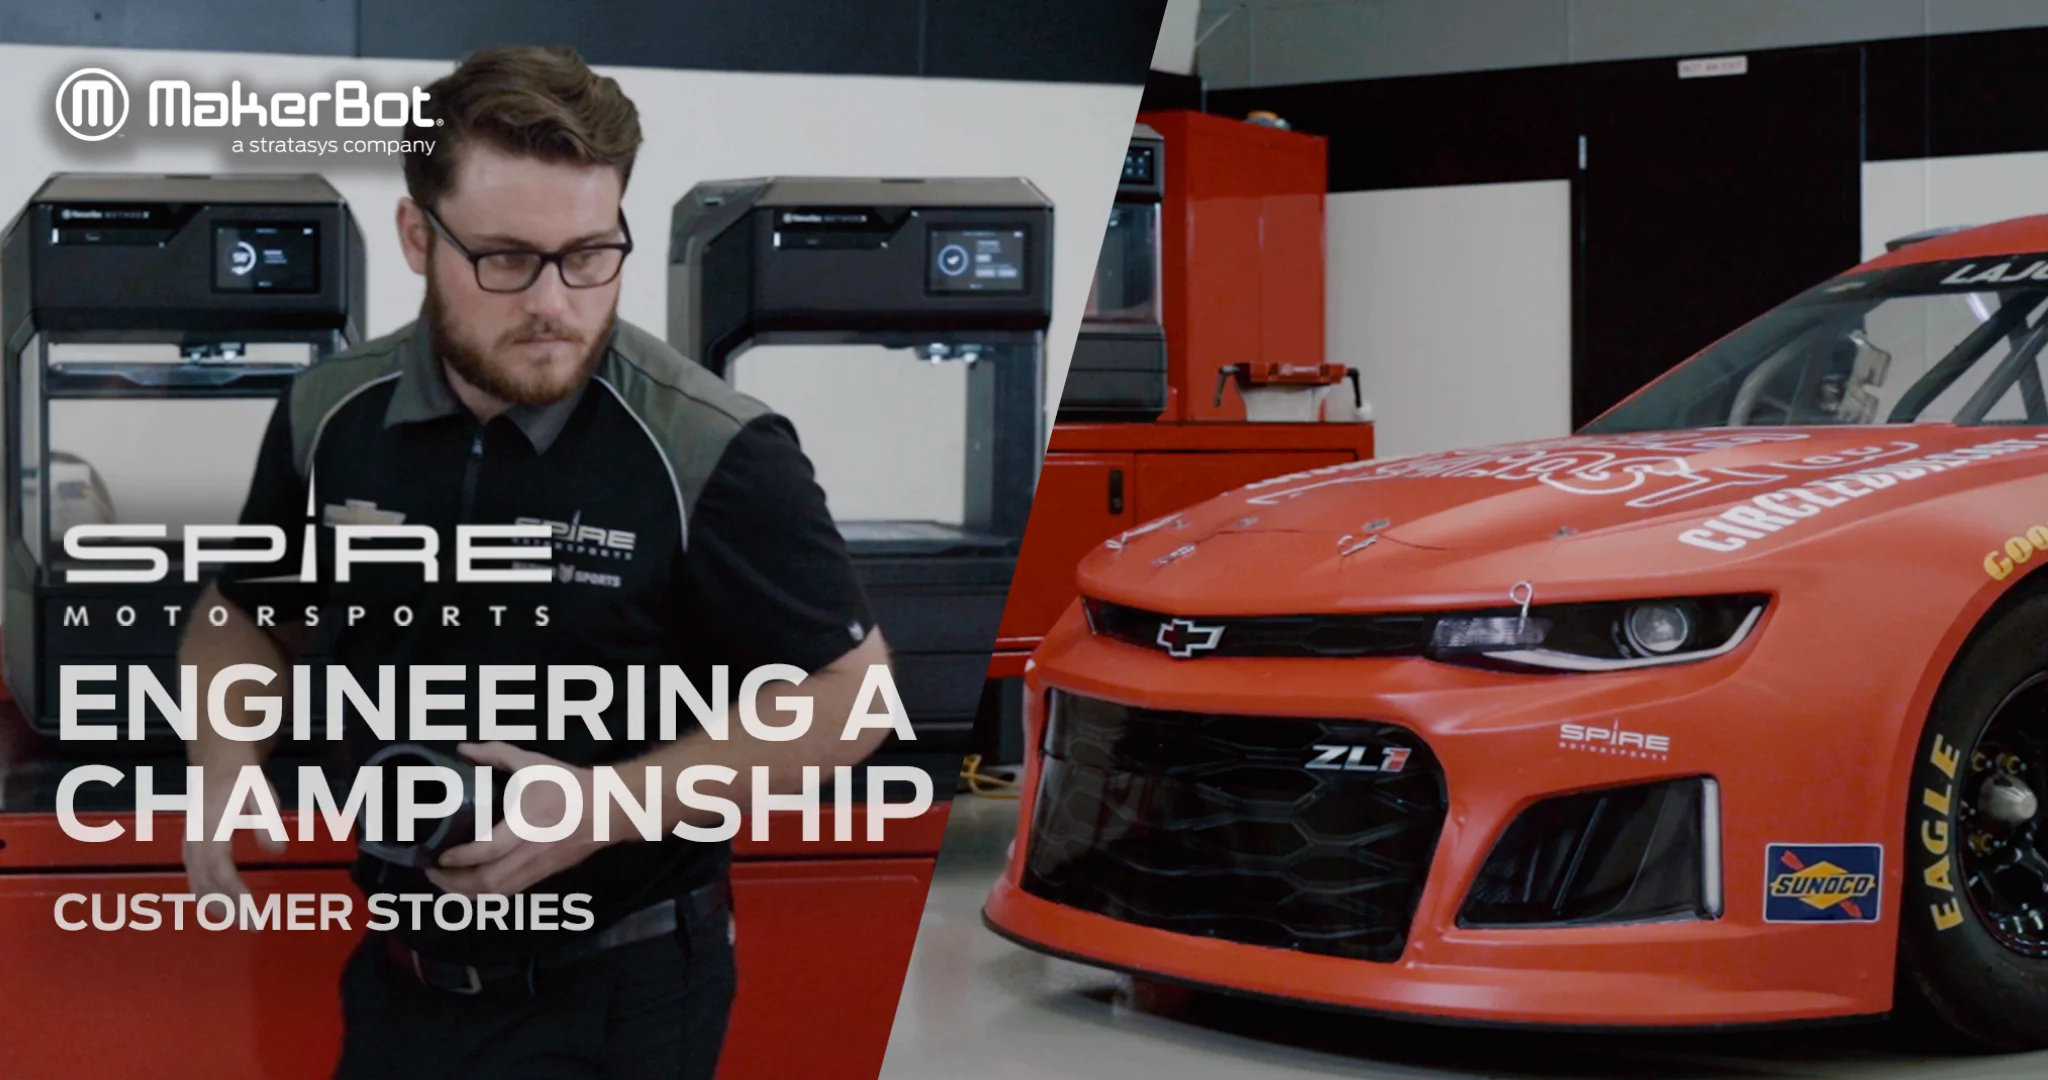 NASCAR Cup Series Team Spire Motorsports Punches Above Weight with the Help of a Fleet of MakerBot METHOD X 3D Printers